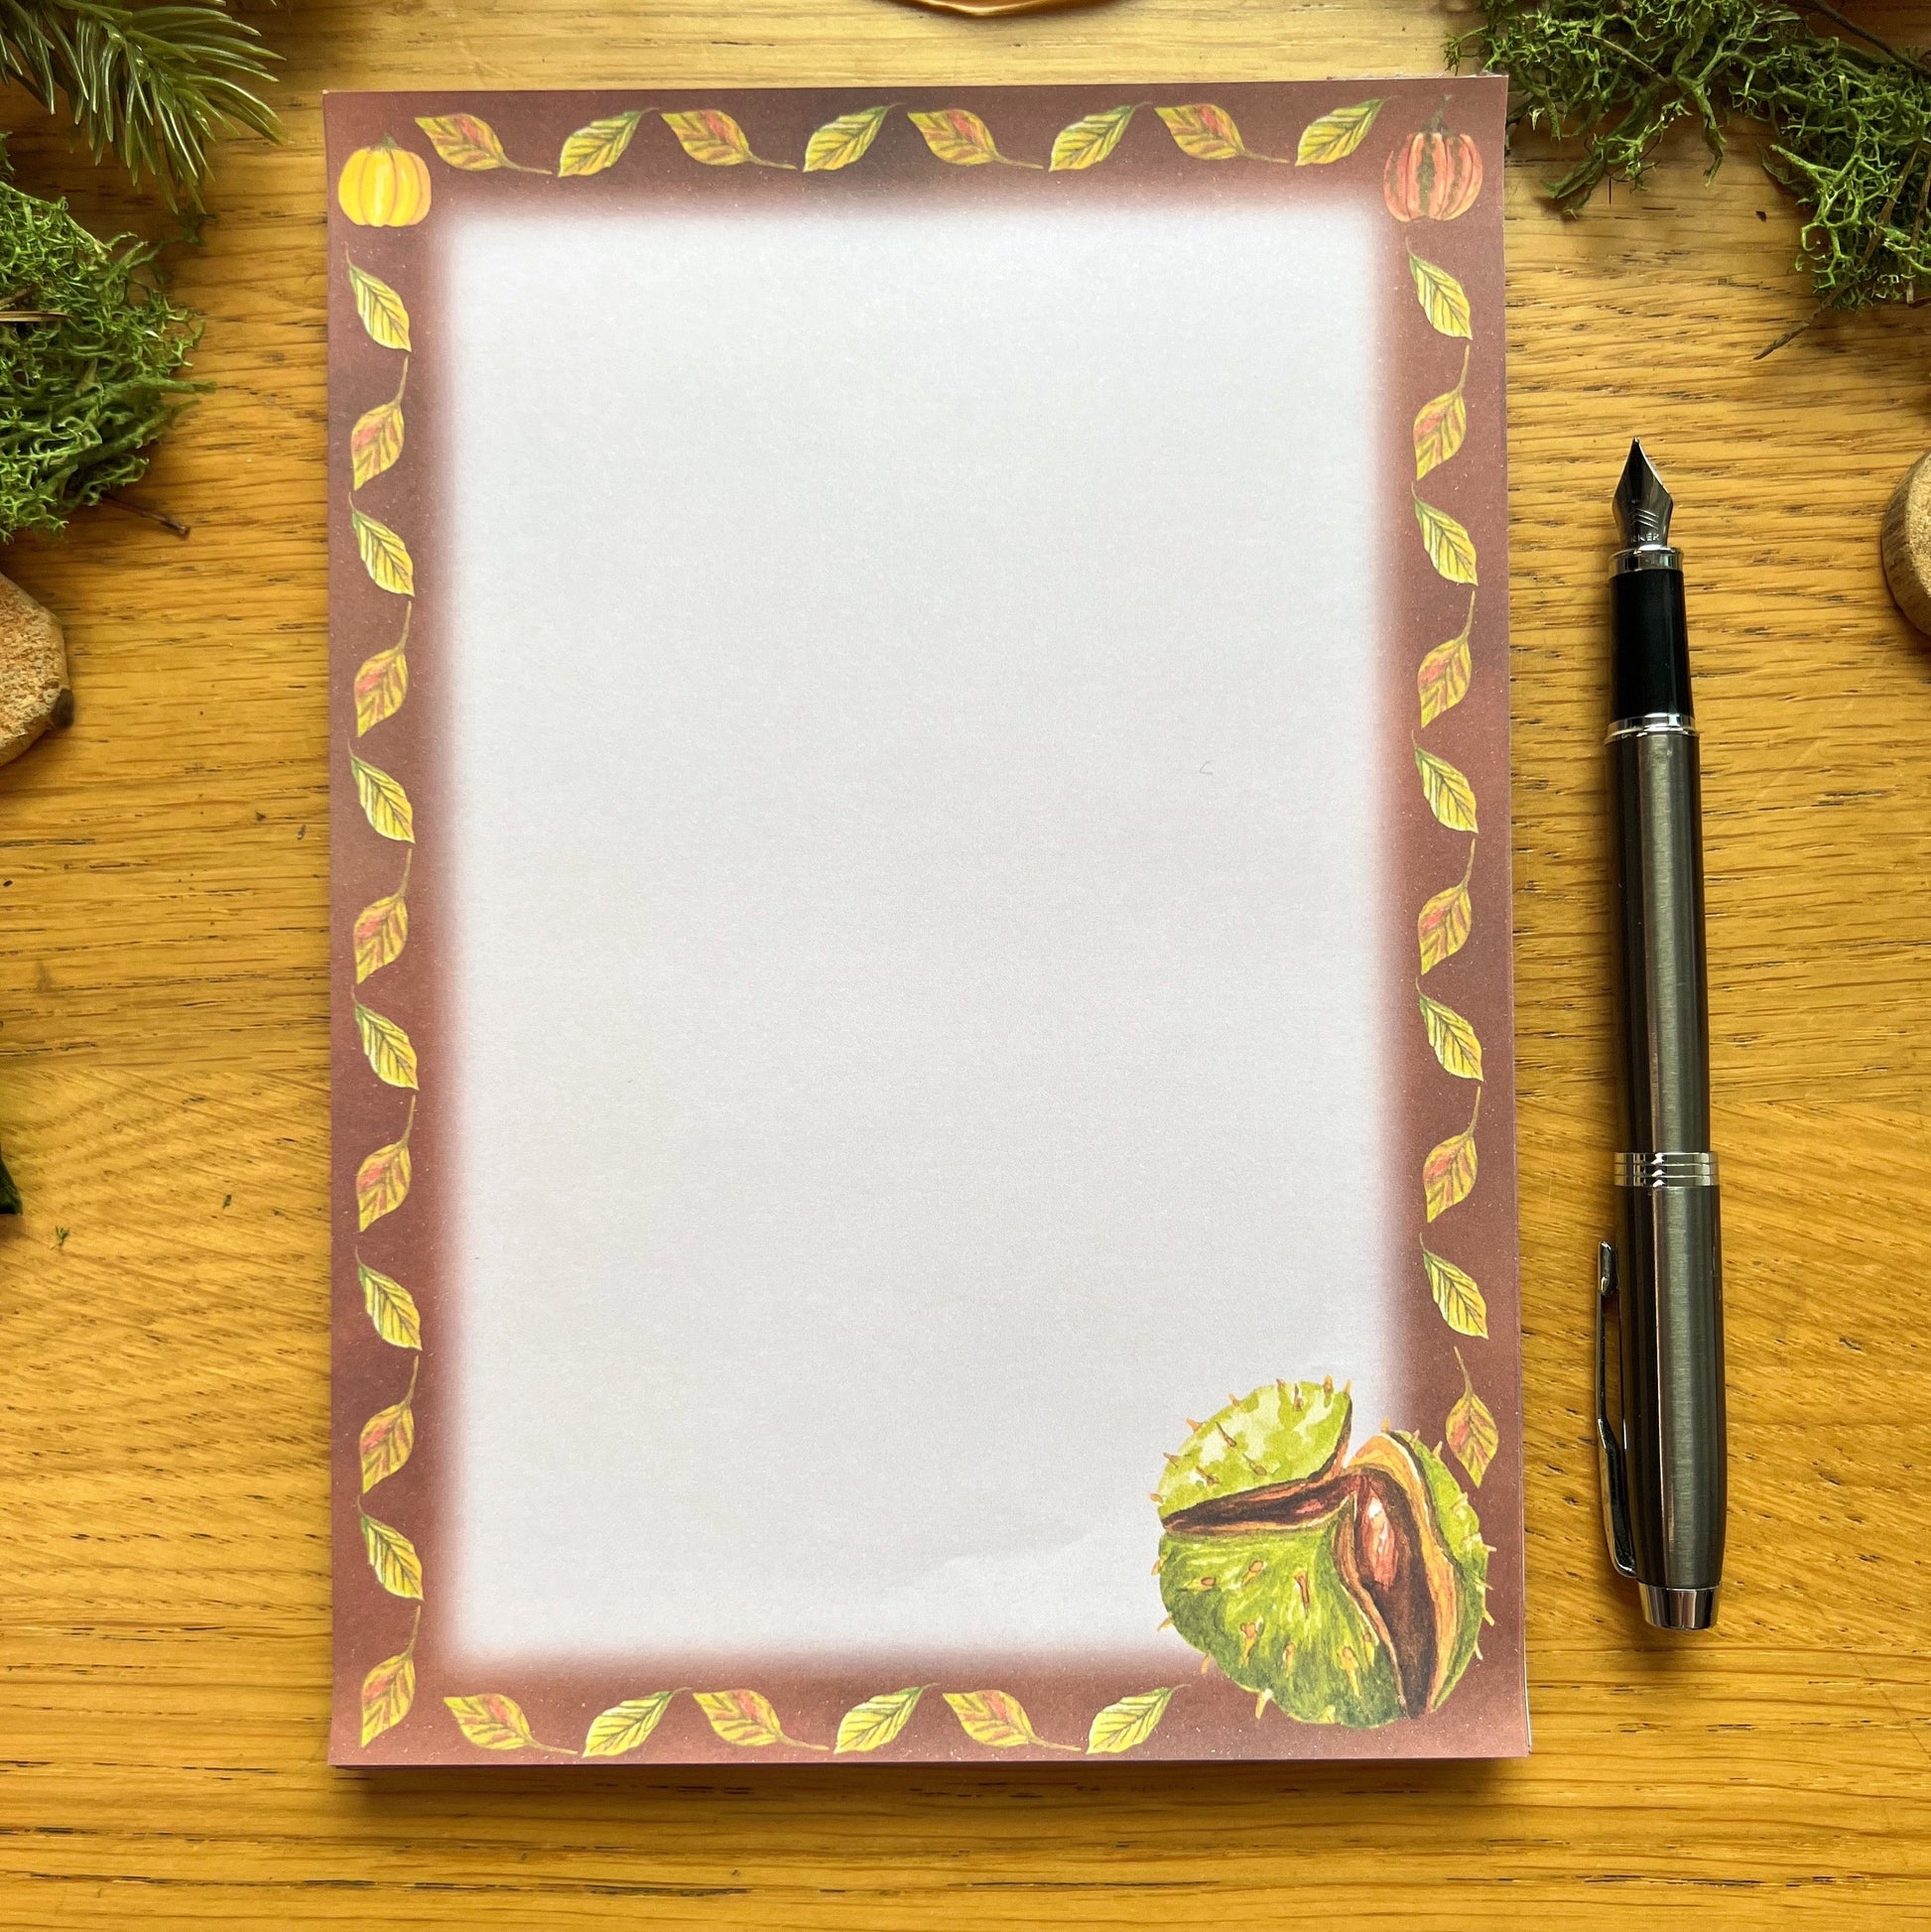 Autumnal conker illustrated notepad with warm brown leaf and pumpkin illustrated border around the page. The writing paper is blank. Notepad is on a wooden desk decorated with green moss, straw, pine cones and wooden slices and a fountain ink pen